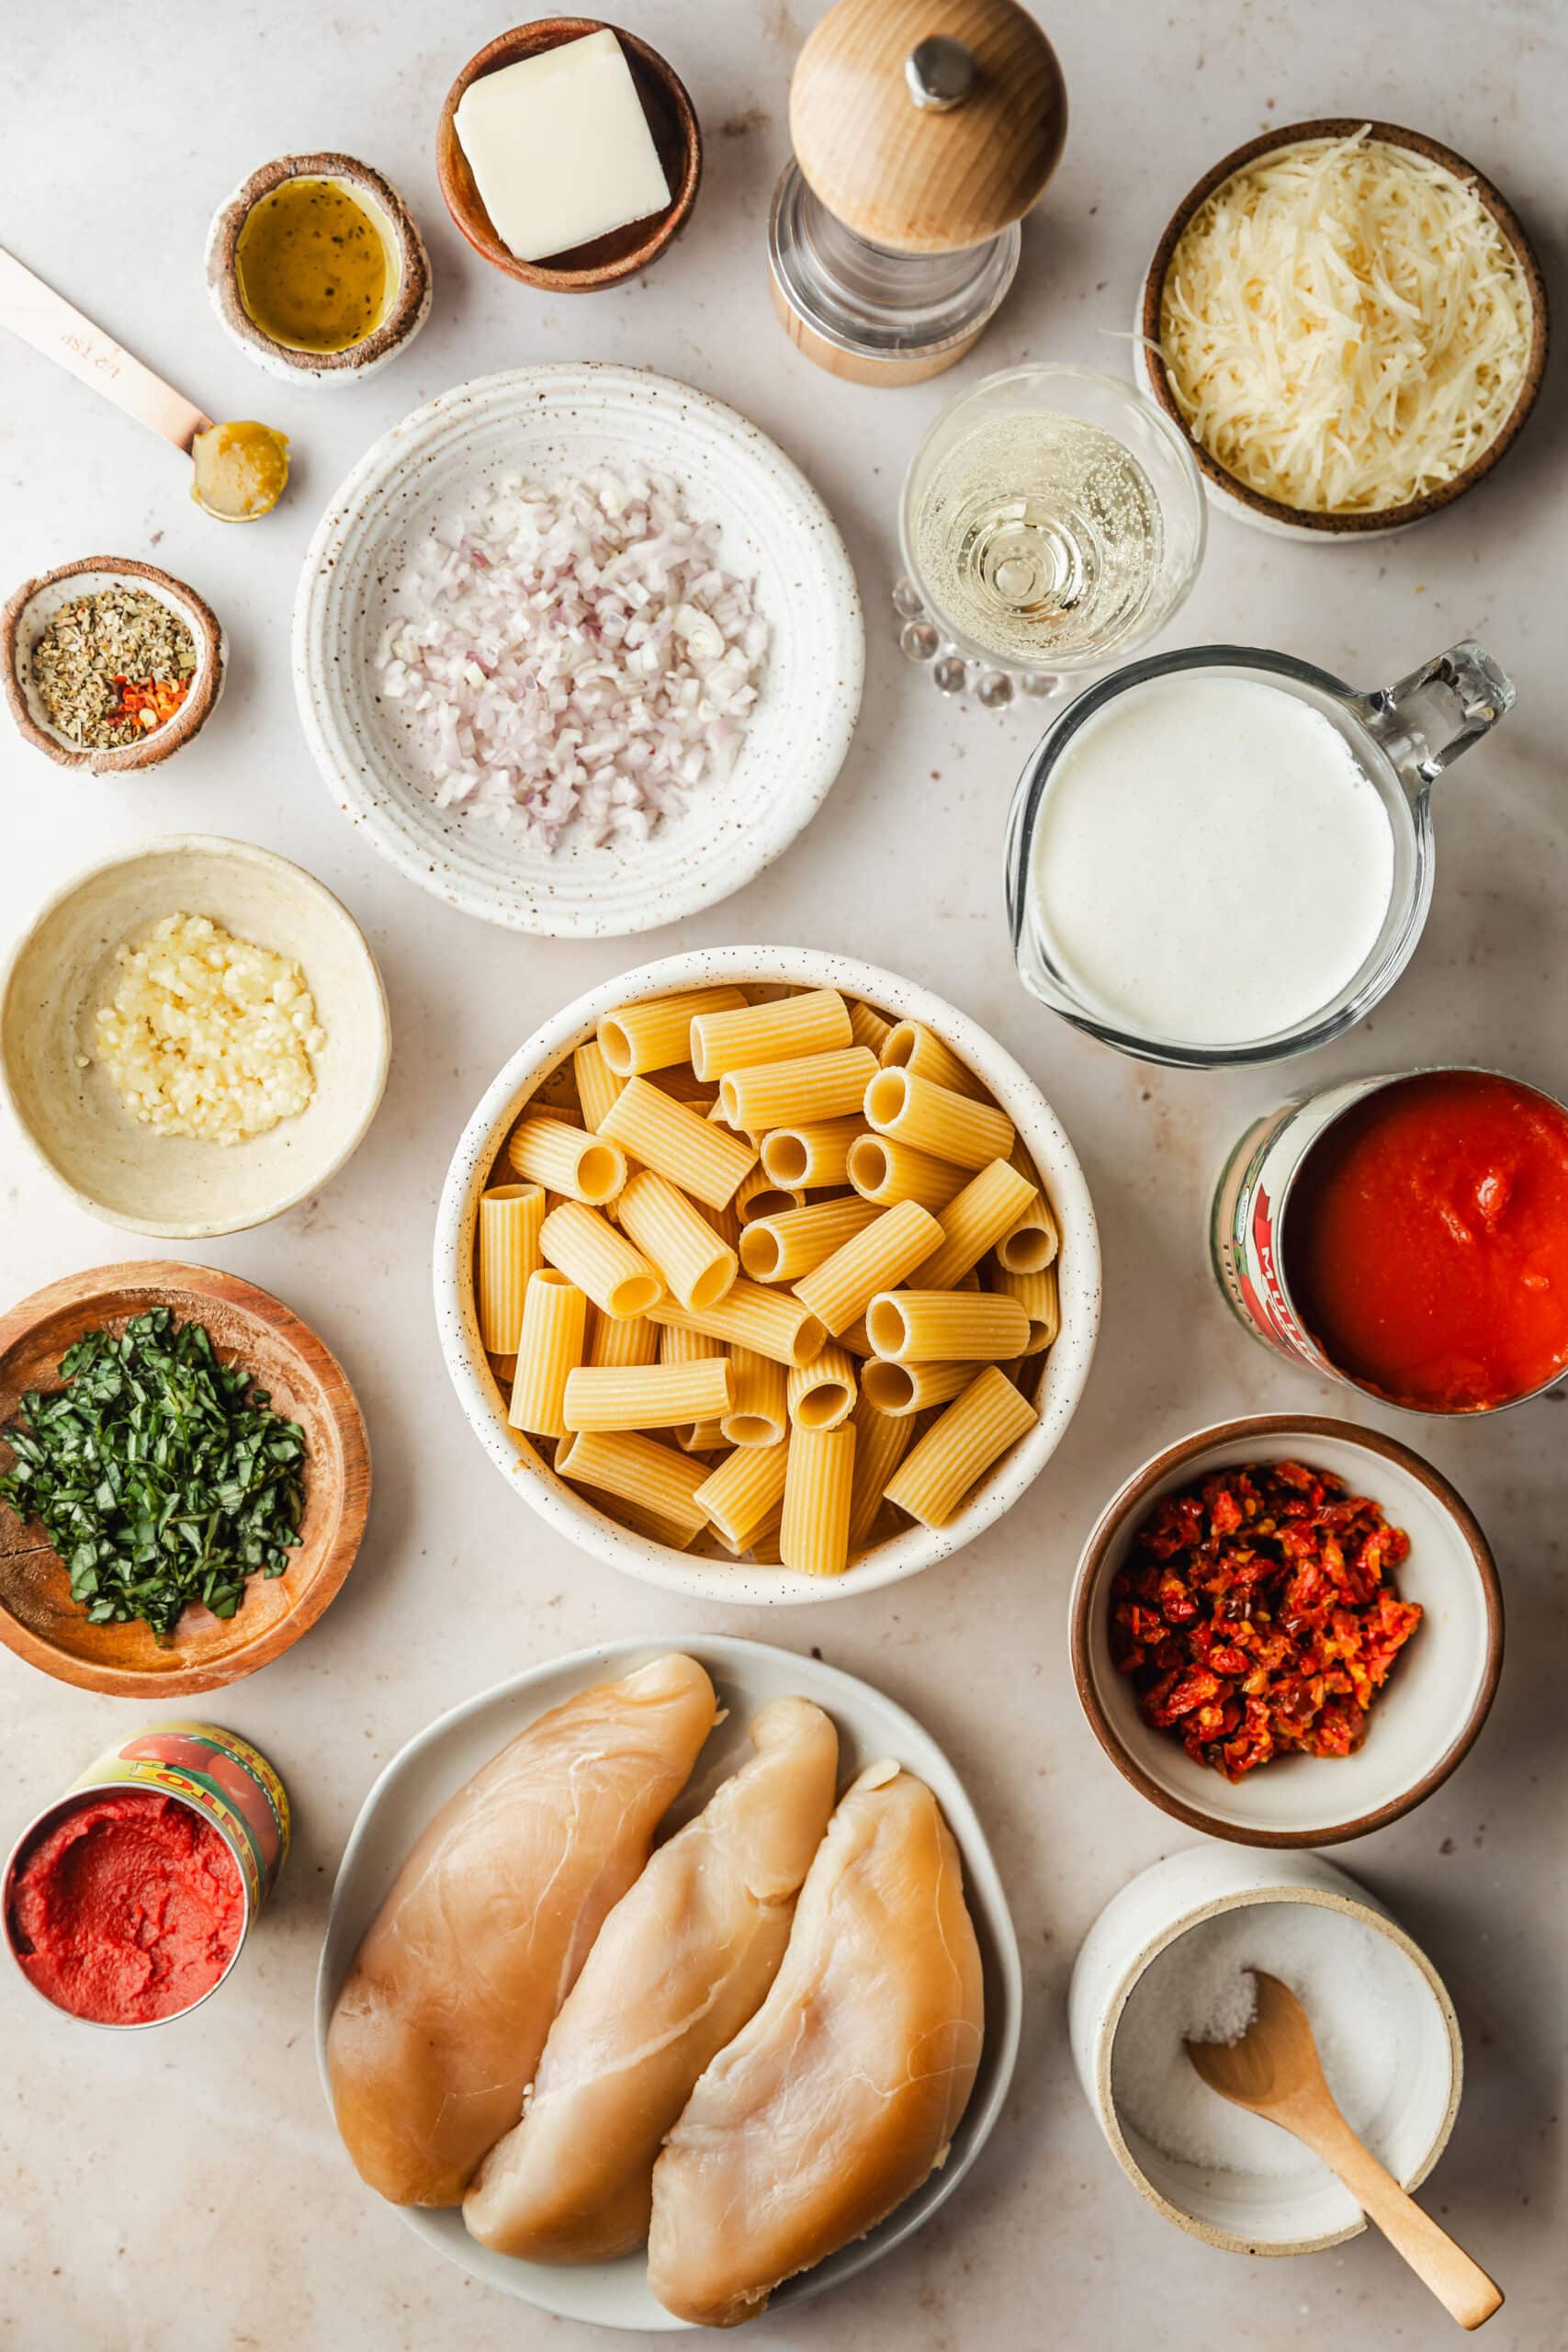 White and brown bowls of pasta, chicken, garlic, basil, salt, sundried tomatoes, cream, shallots, spices, parmesan, and white wine next to cans of tomatoes on a beige counter.